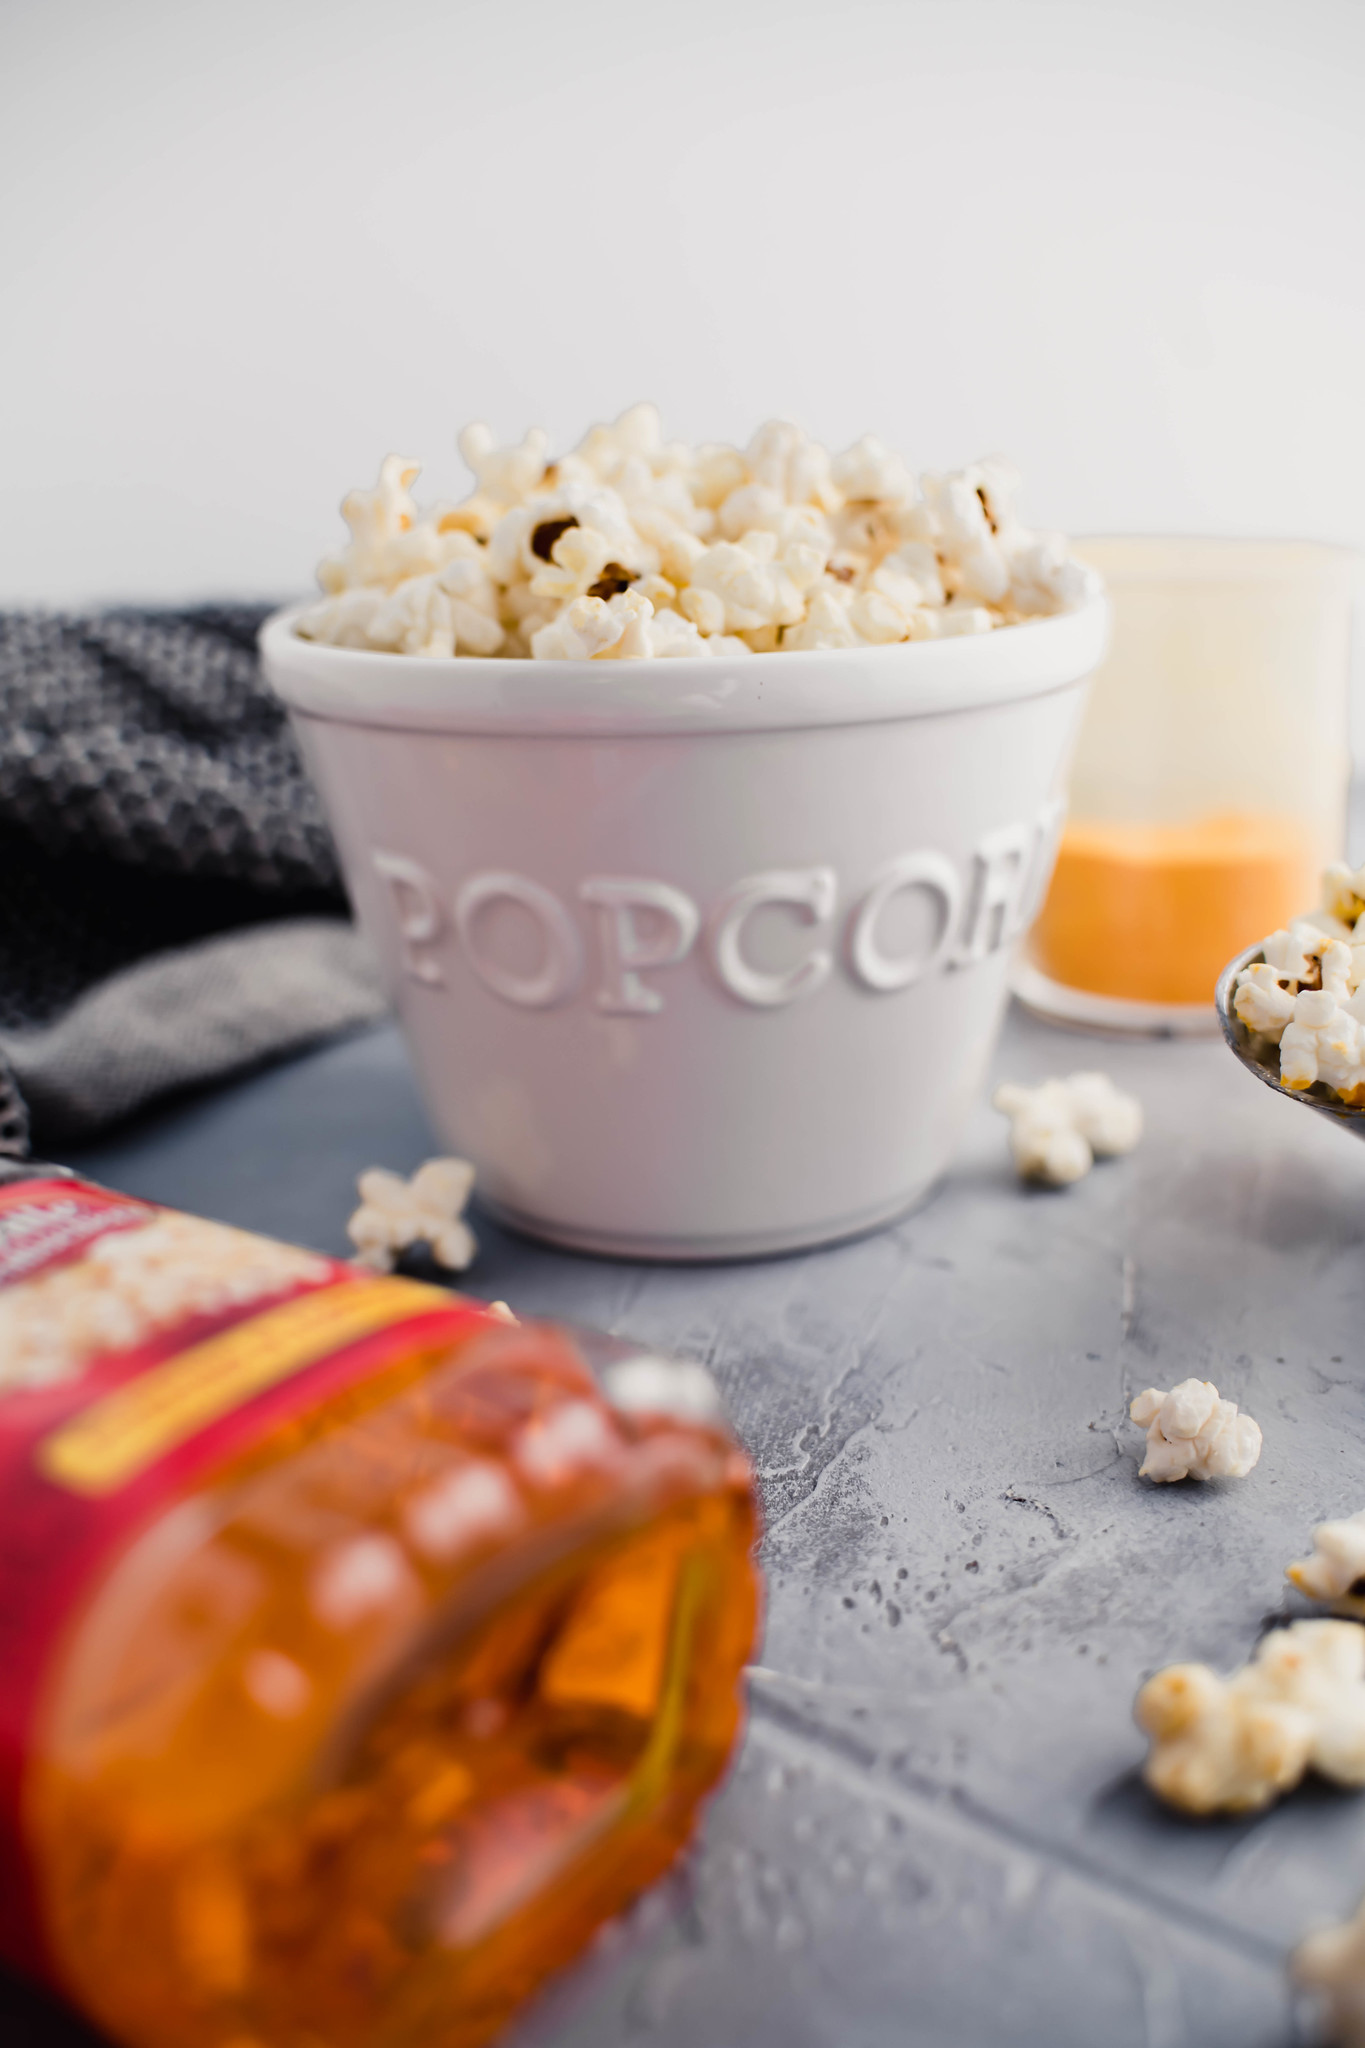 White ceramic bowl that says popcorn, filled with popcorn.